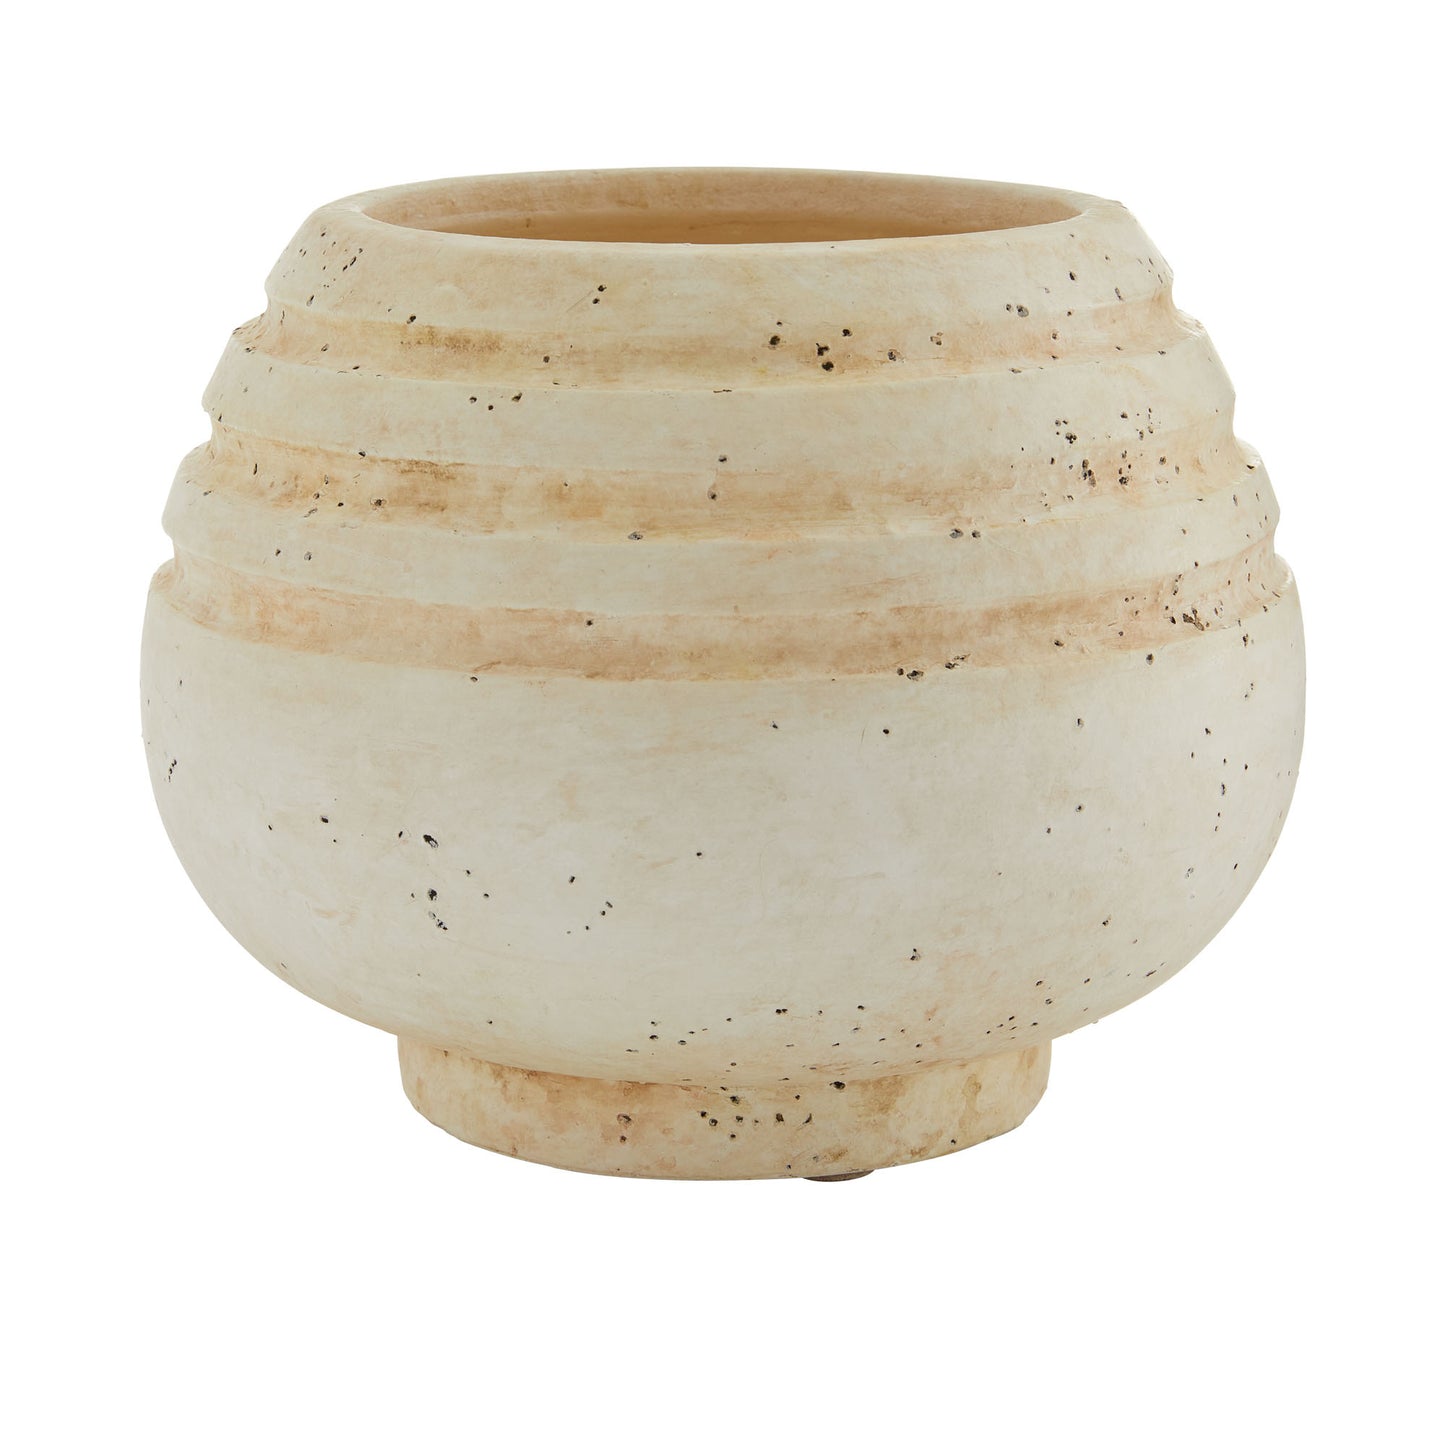 Marisol Vase - Toasted Ivory Terracotta Pot - Rustic Desert Décor - Home or Office Plant Planter